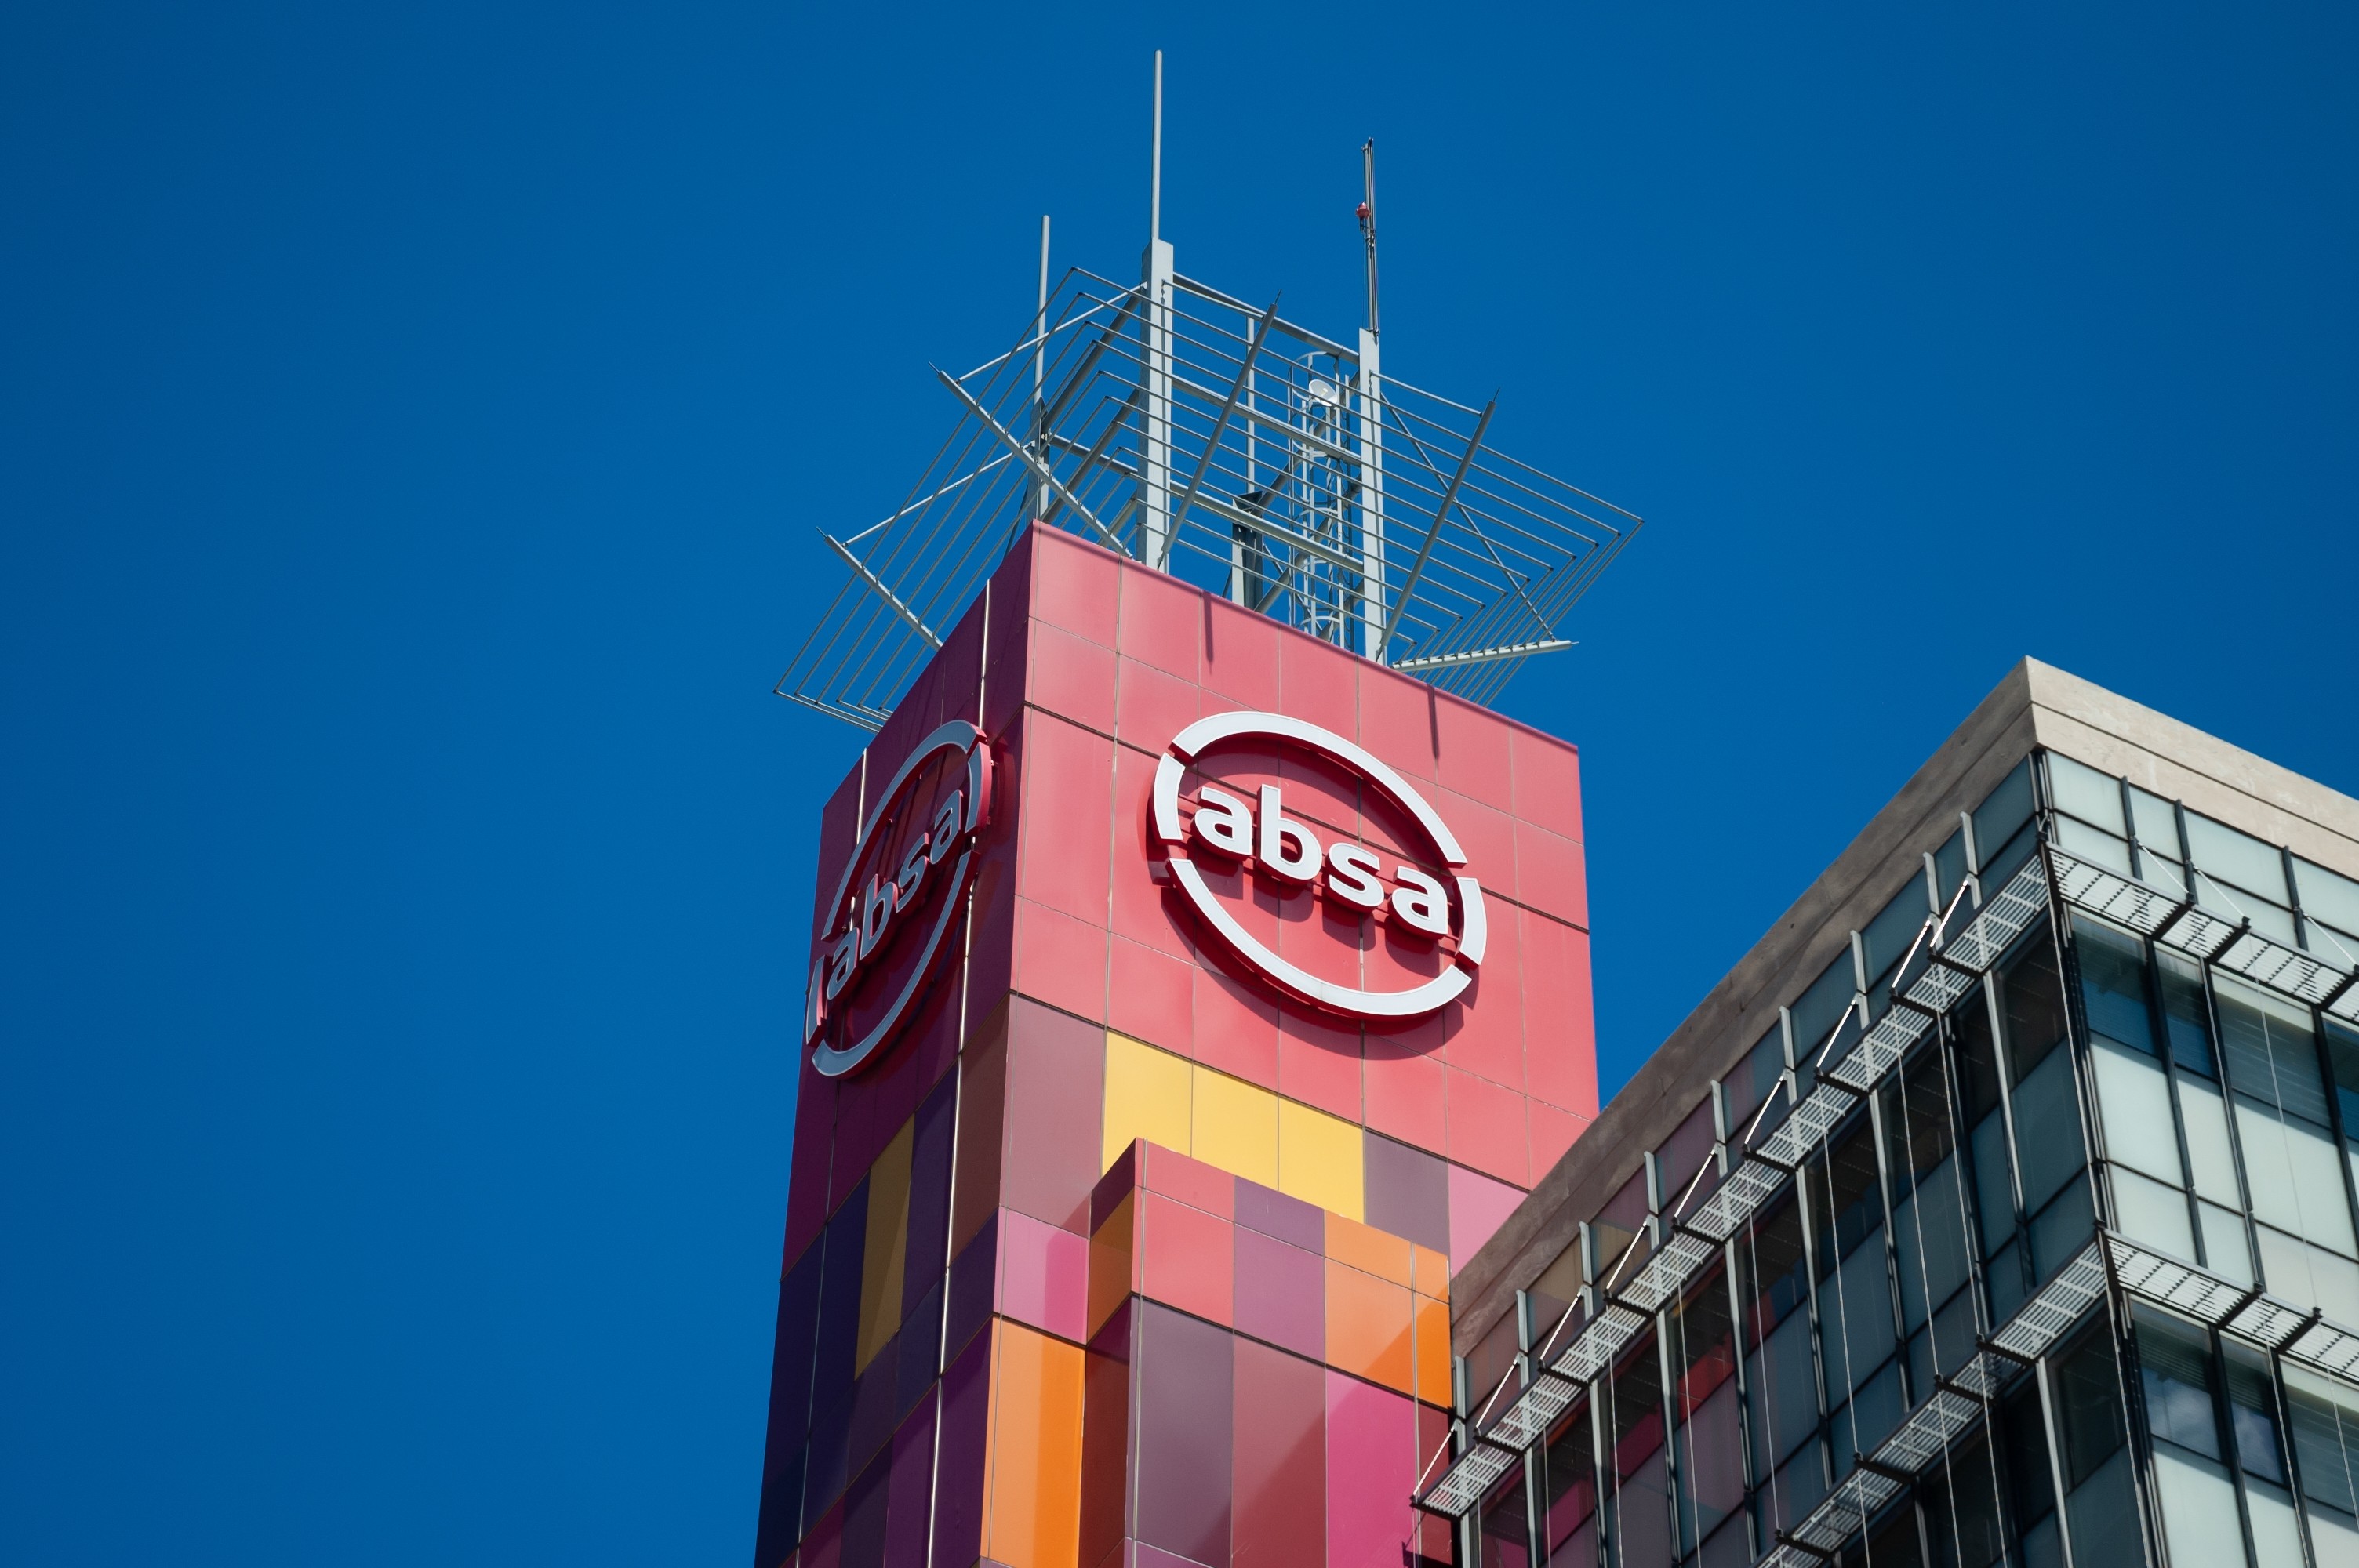 Absa Group controls banks in 10 African countries, including Ghana, Kenya, Botswana and Tanzania and serves millions of customers on the continent. Photo: Shutterstock